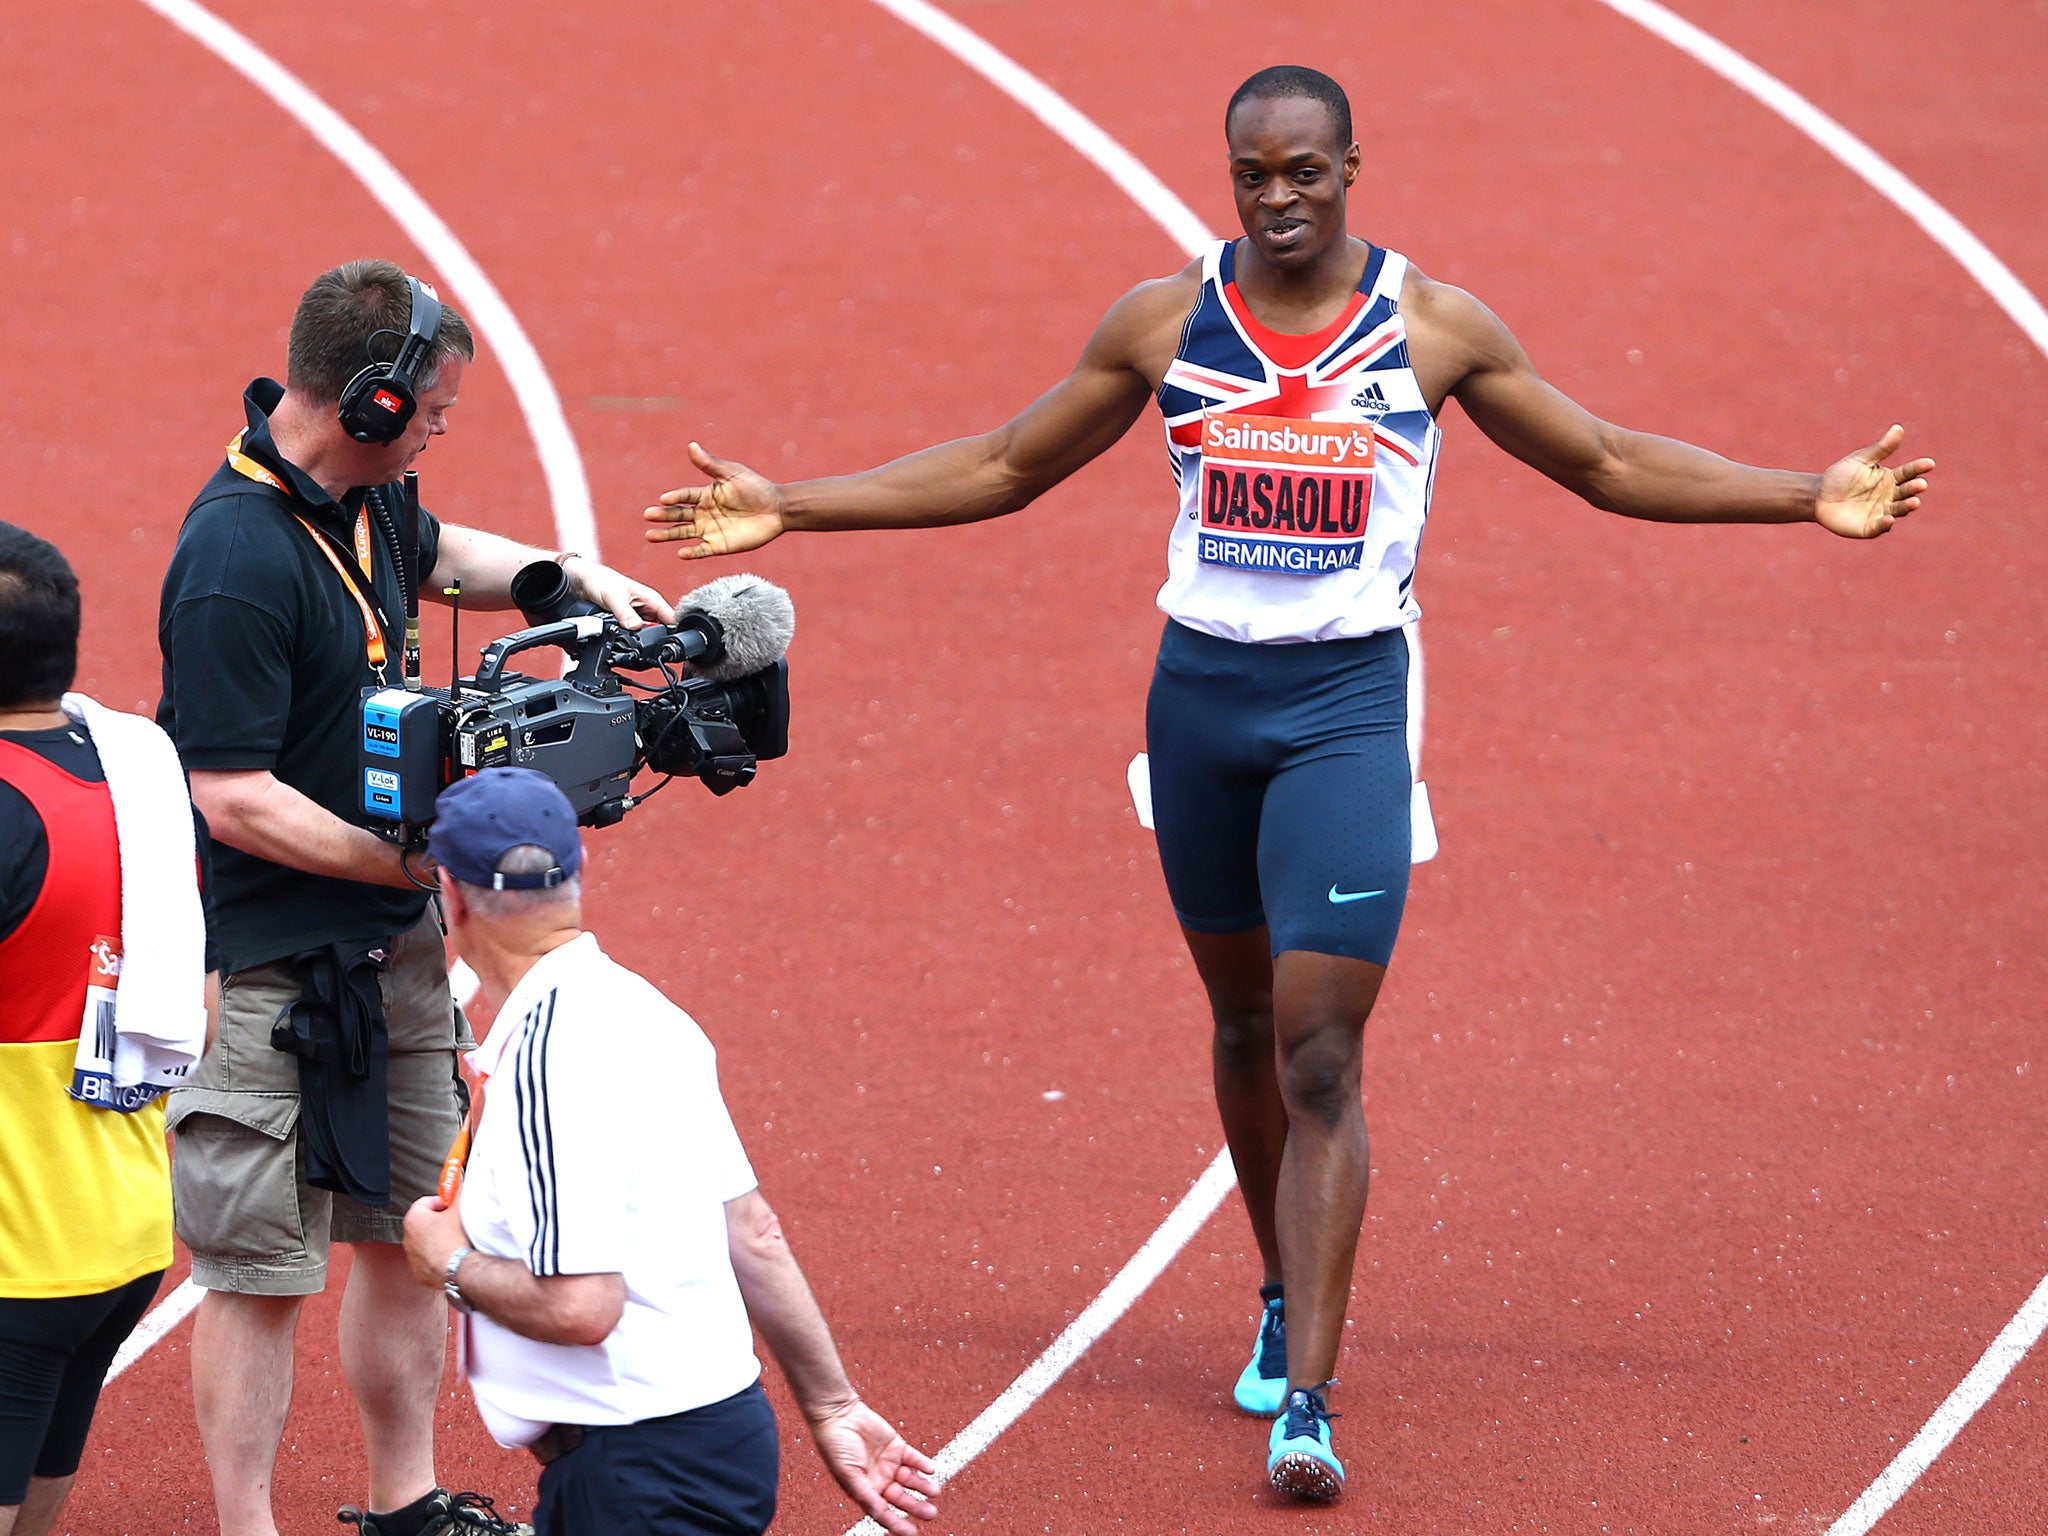 British Olympic champion Darren Campbell tips James Dasaolu to reach 9.8 seconds